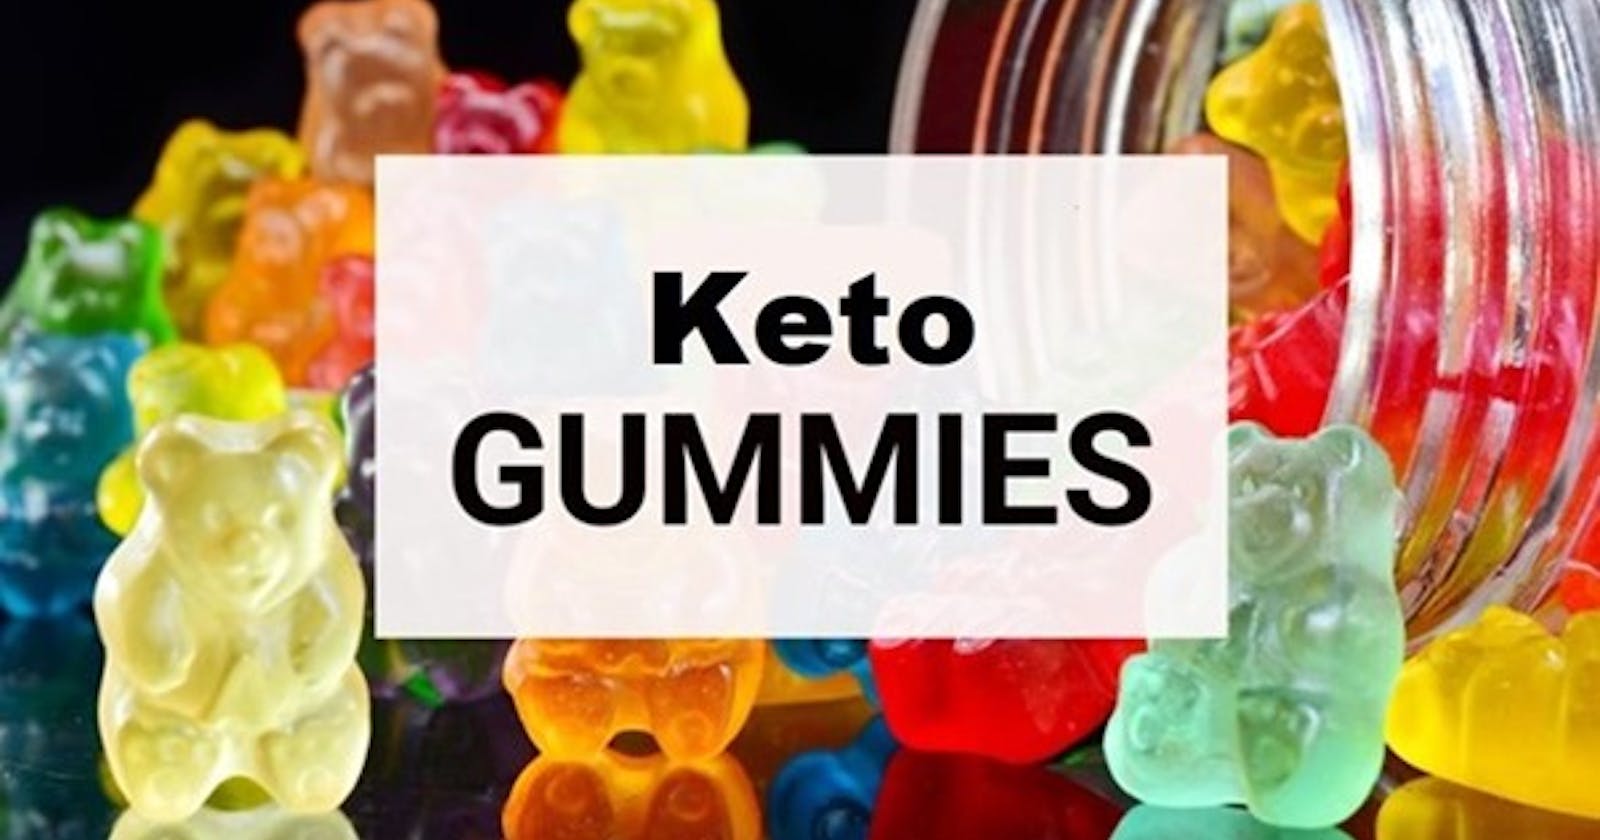 Impact Keto ACV Gummies : Are They Safe For Lose Weight?